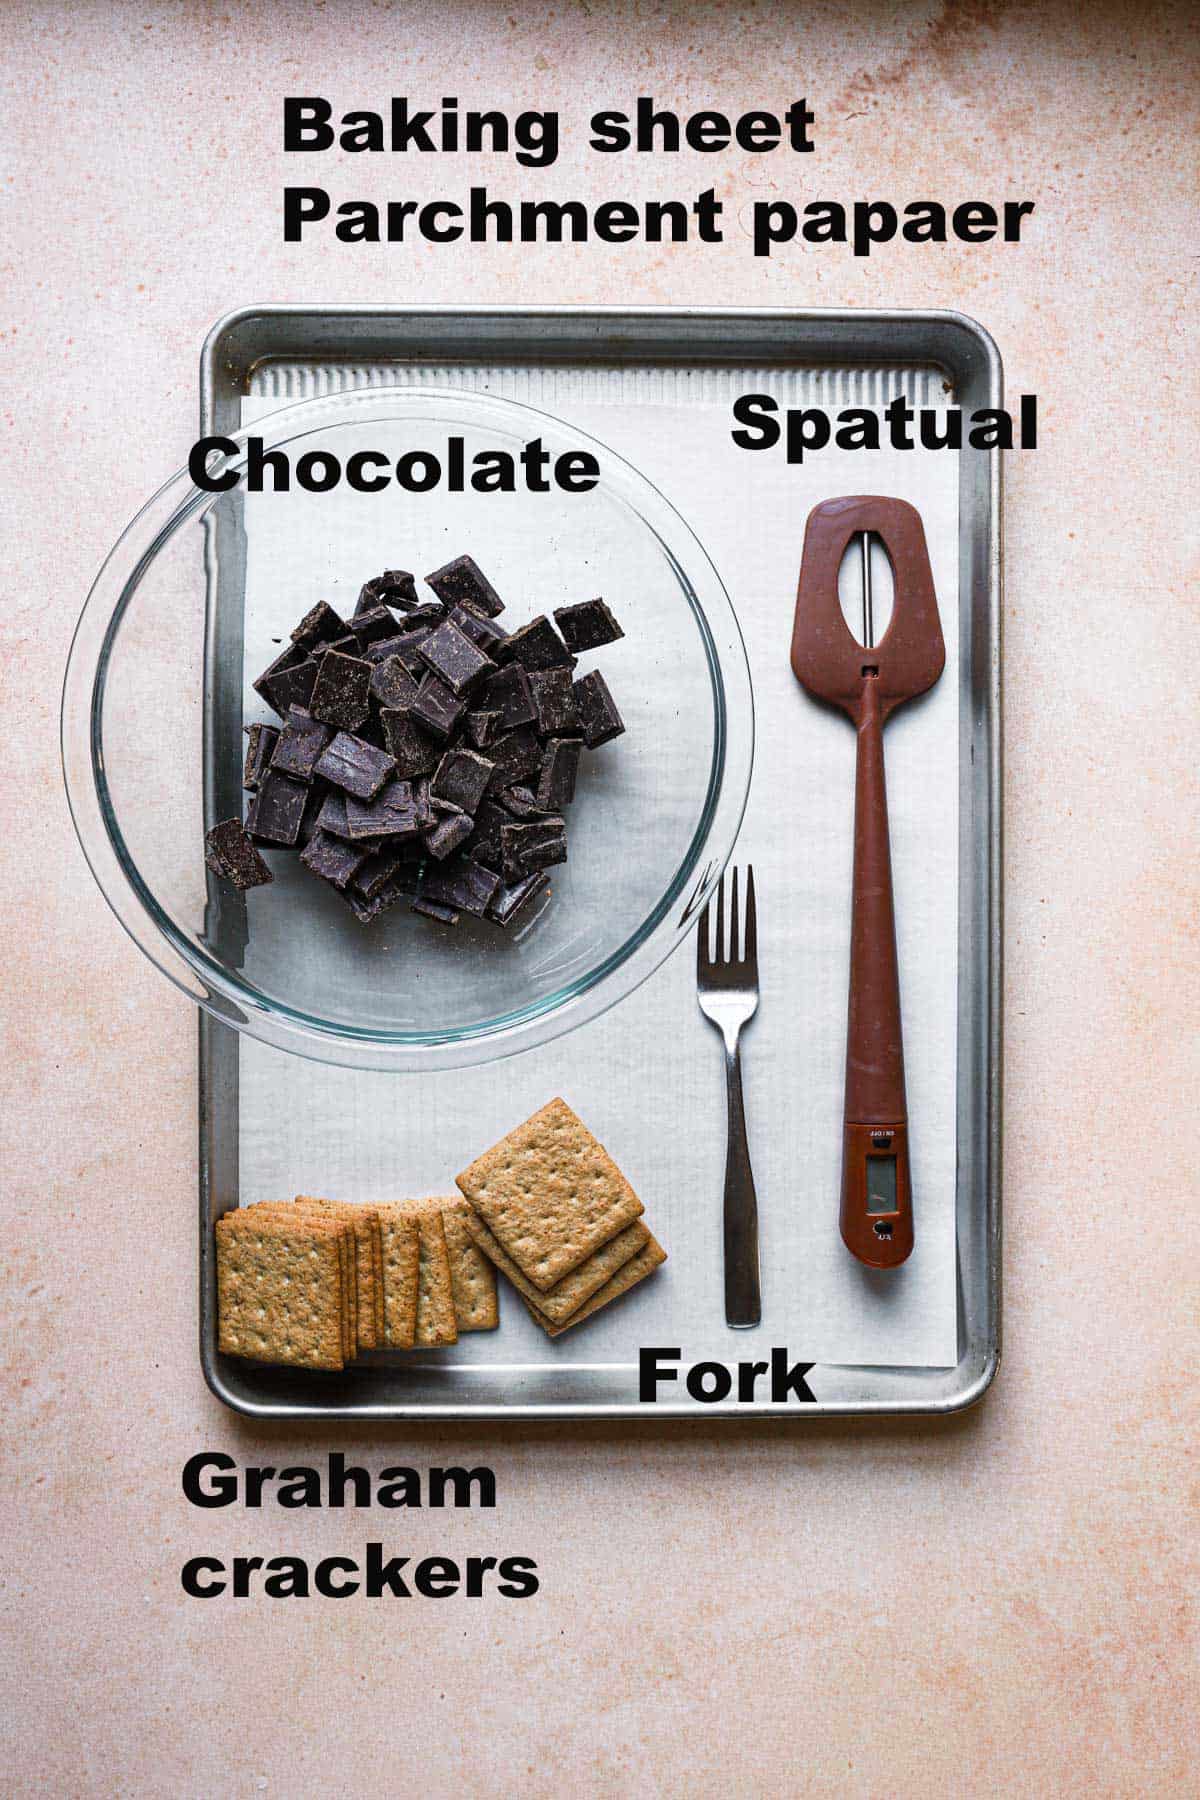 ingridiets and tools to make graham crackers covered with chocolate: a baking pan lined with parchment paper, a microwave safe bowl, chocolate, graham crackers, a spatula and a fork.